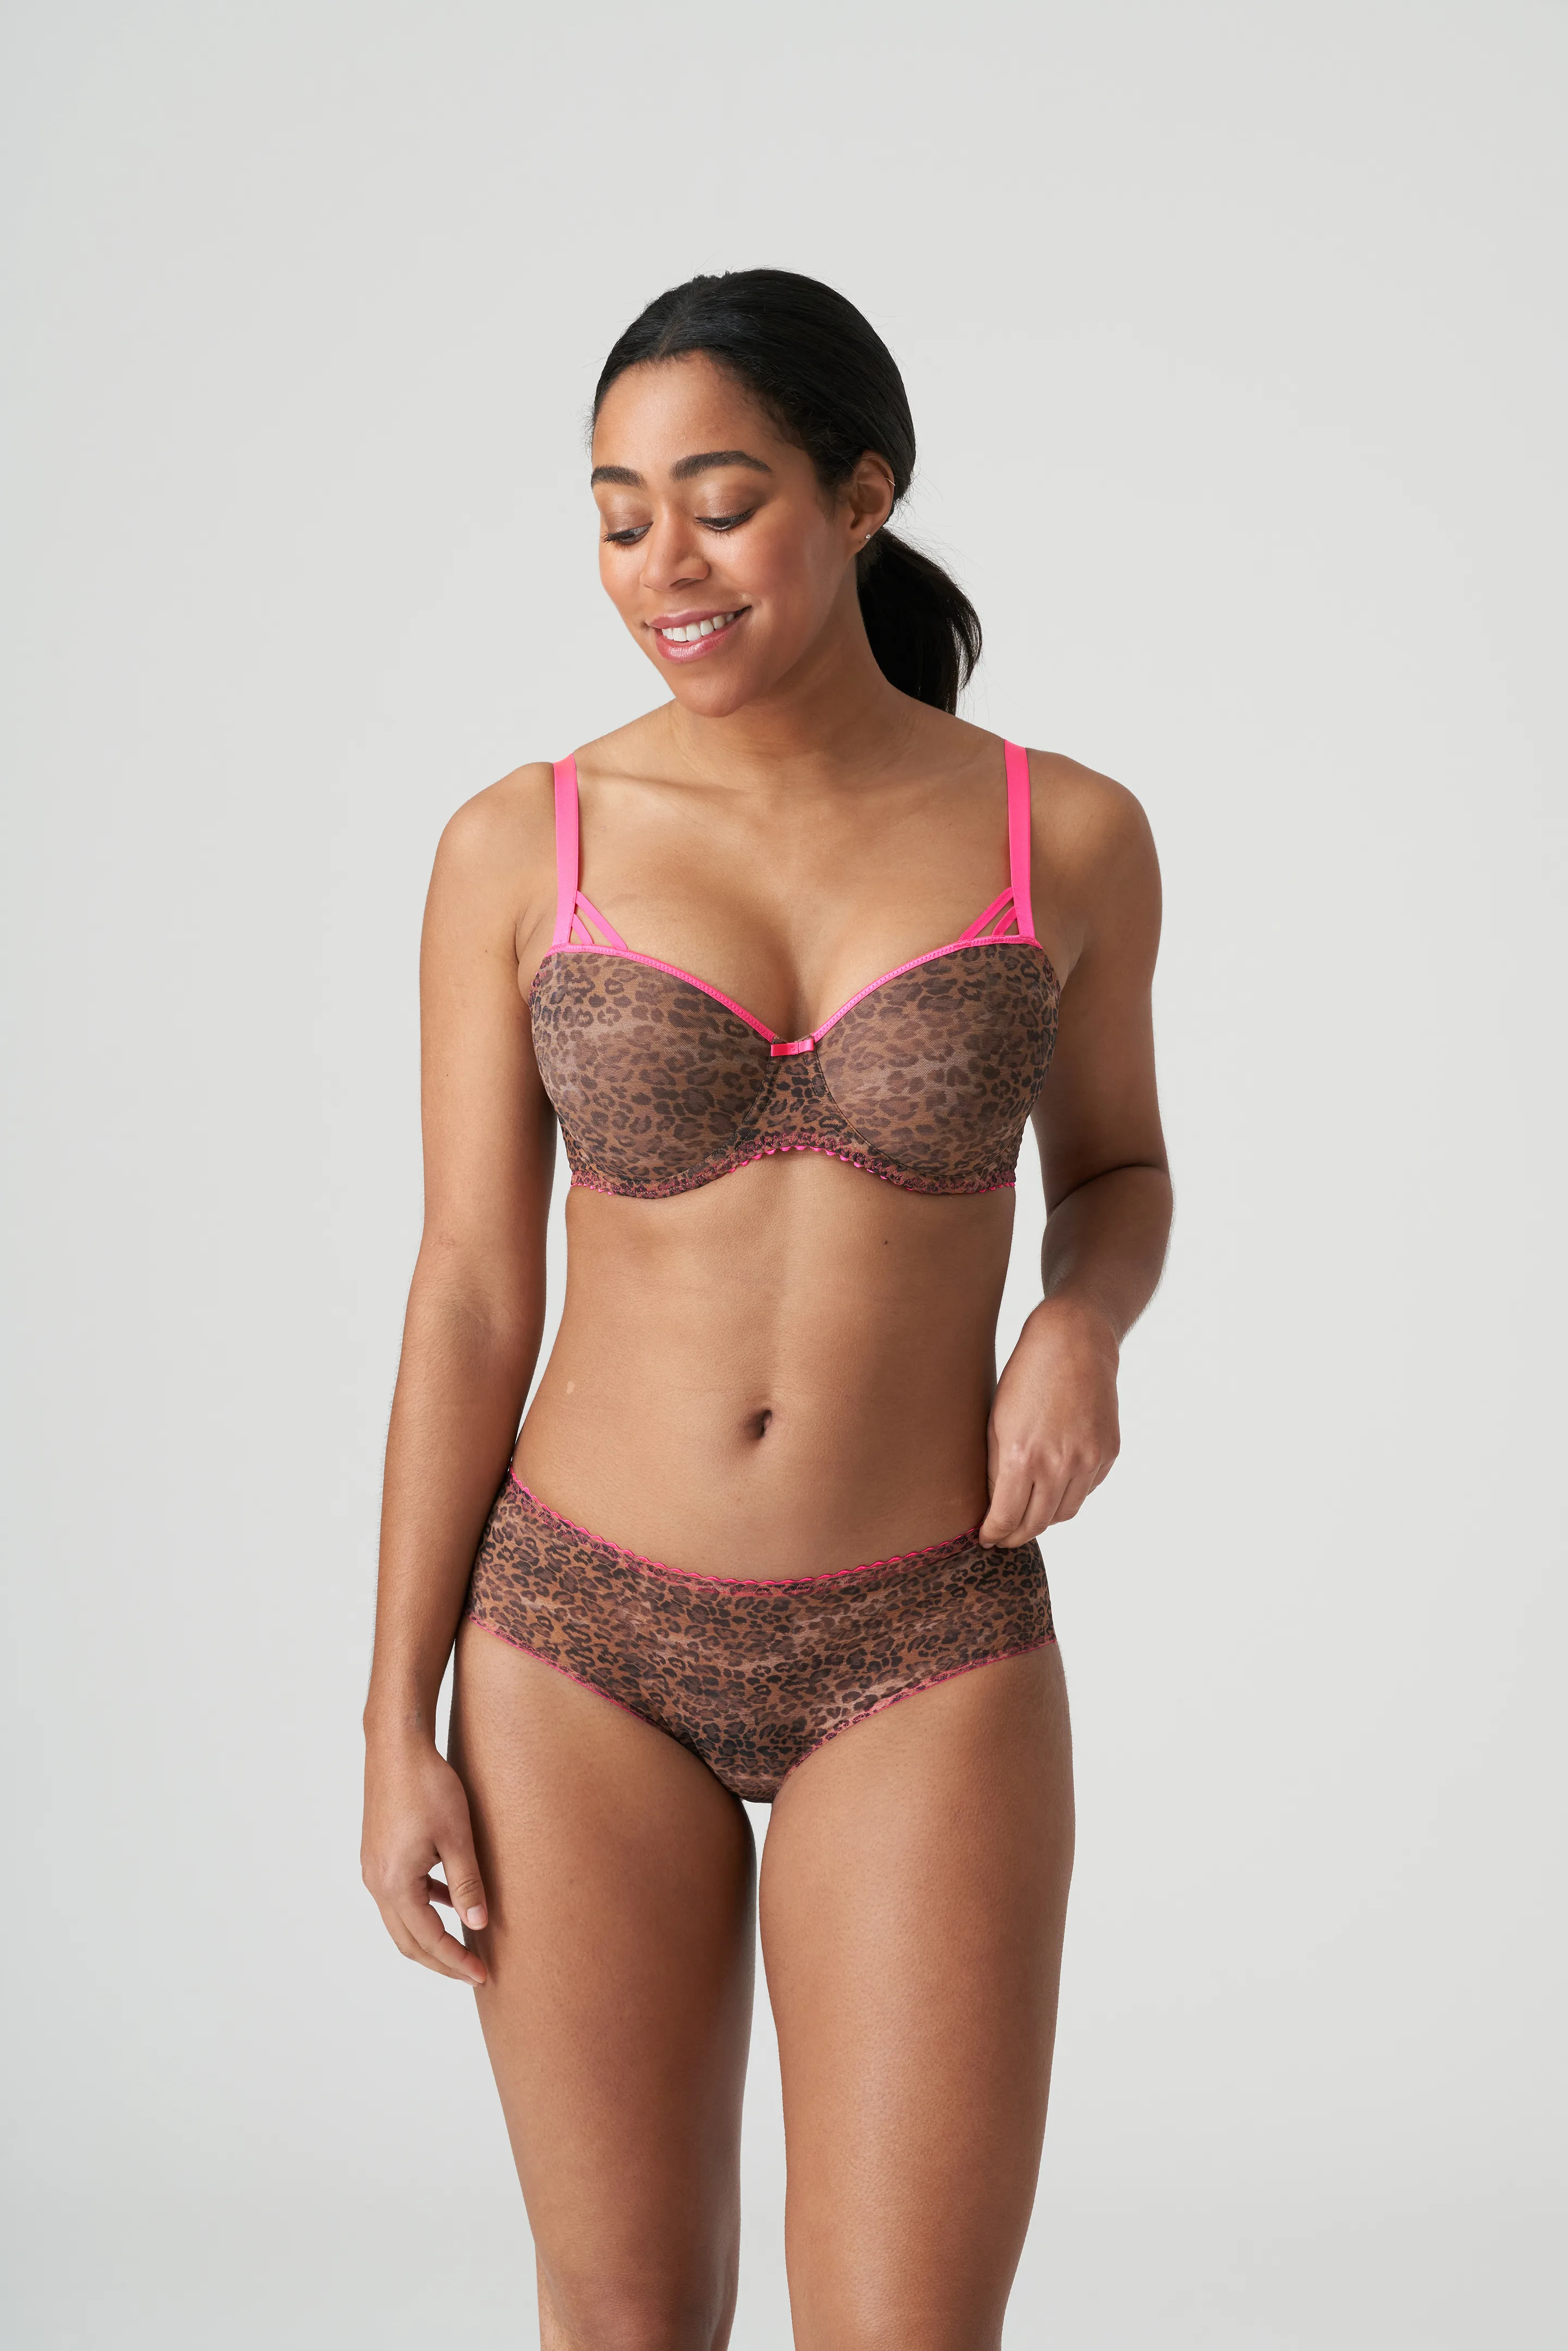 Padded Bra-Buy Tiger Print Non Wired Padded Lace Bra Online